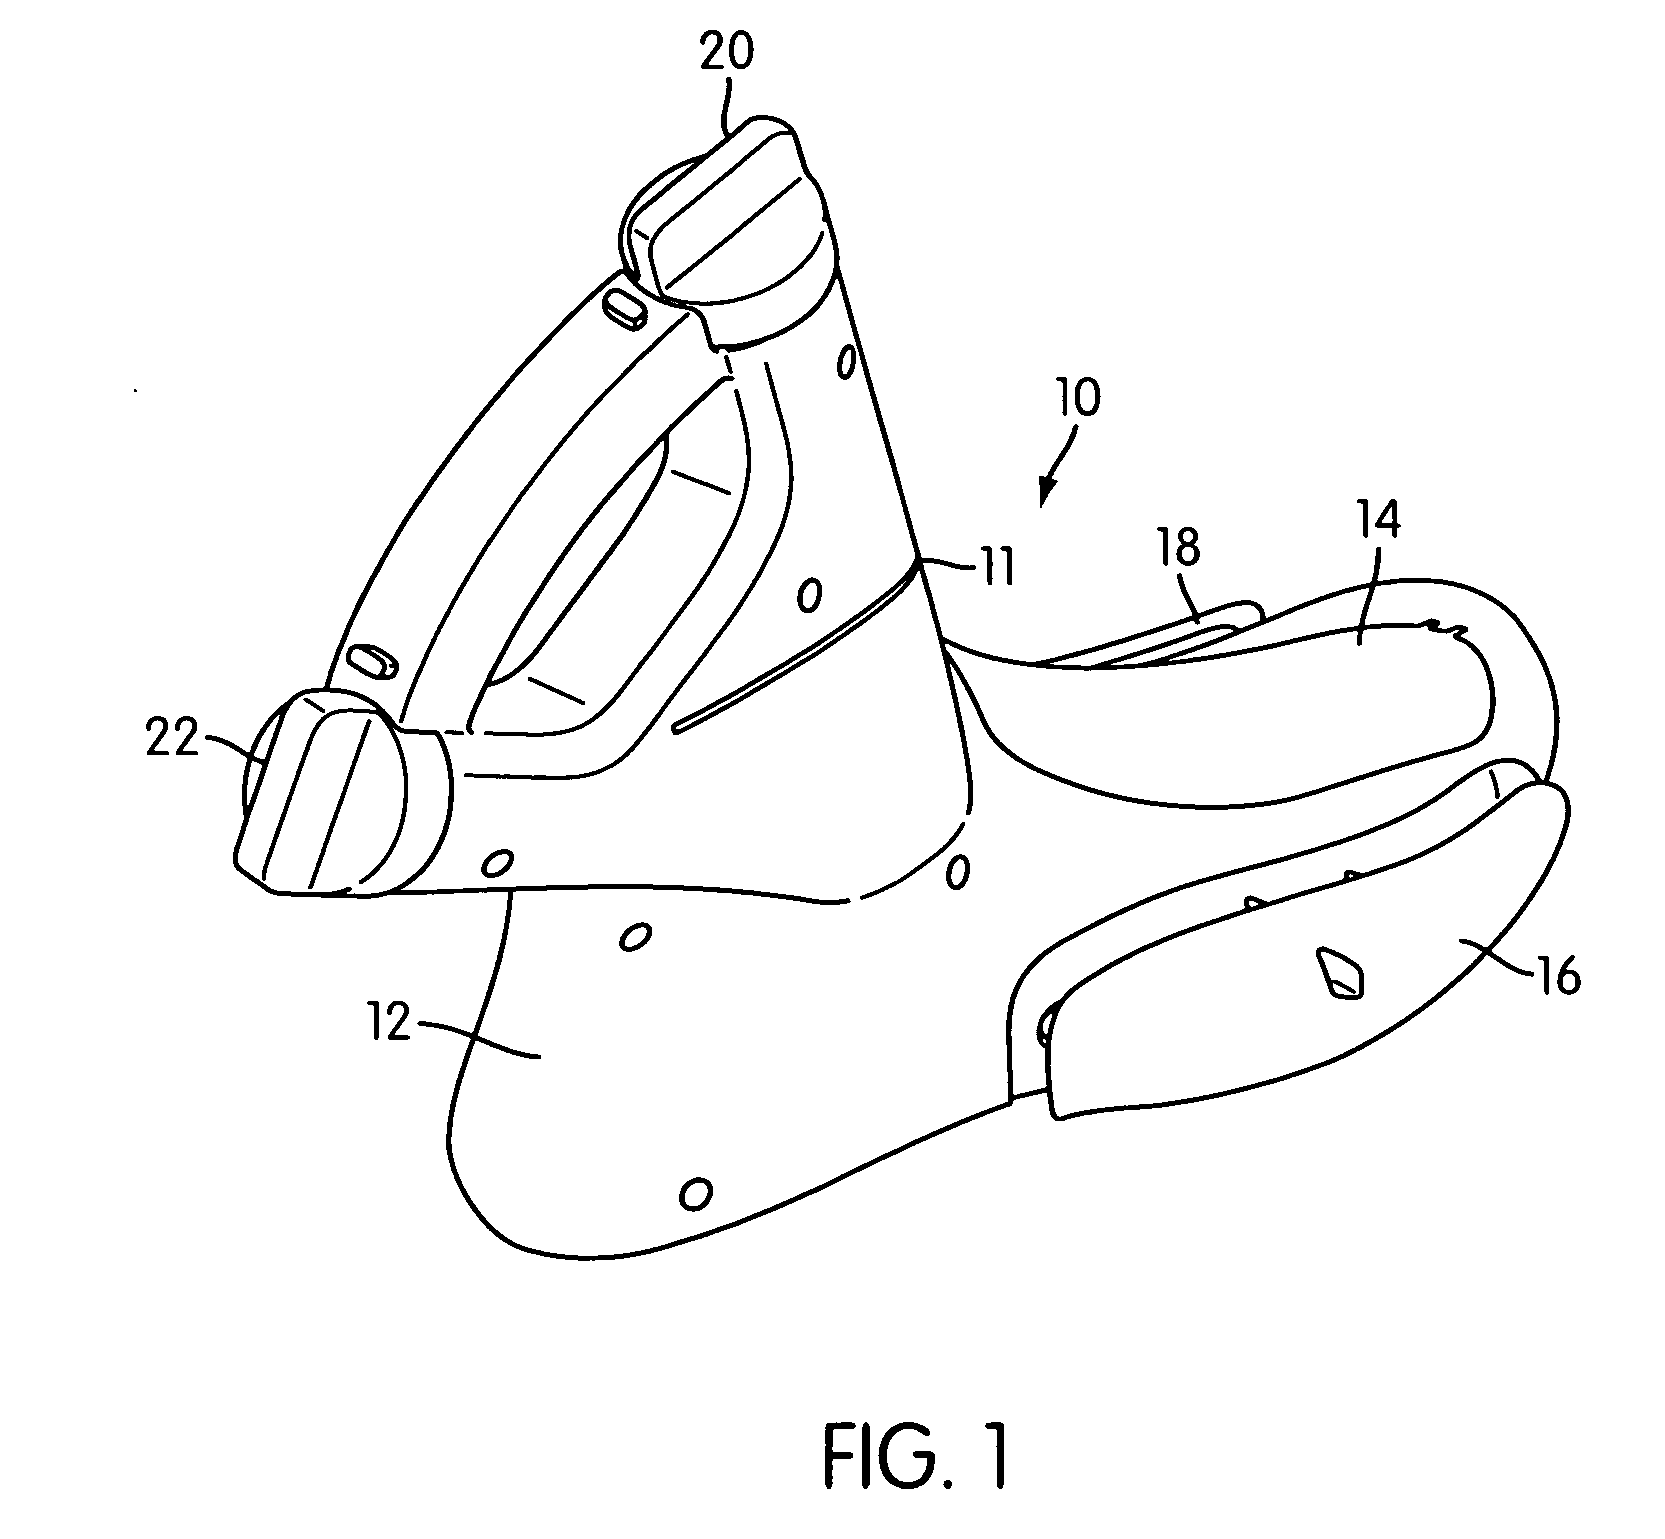 Custom fit system with adjustable last and method for custom fitting athletic shoes